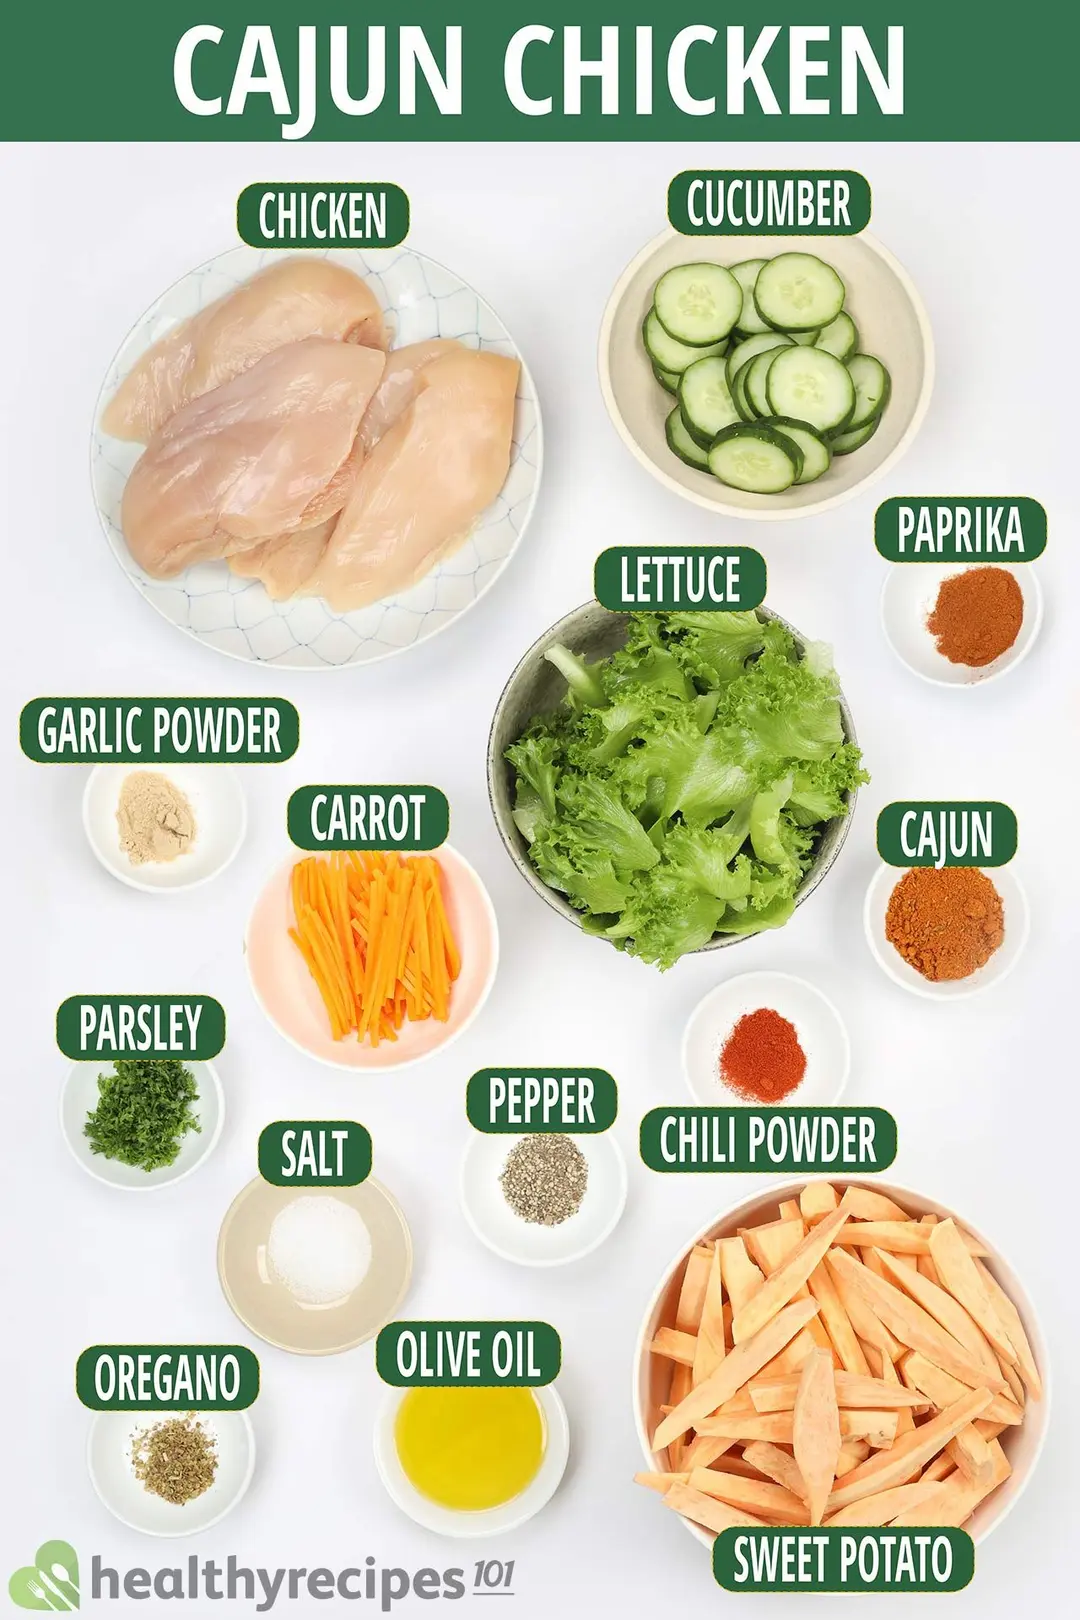 Ingredients for Cajun chicken, including chicken breasts, sweet potatoes, cucumber slices, lettuce, and various spices